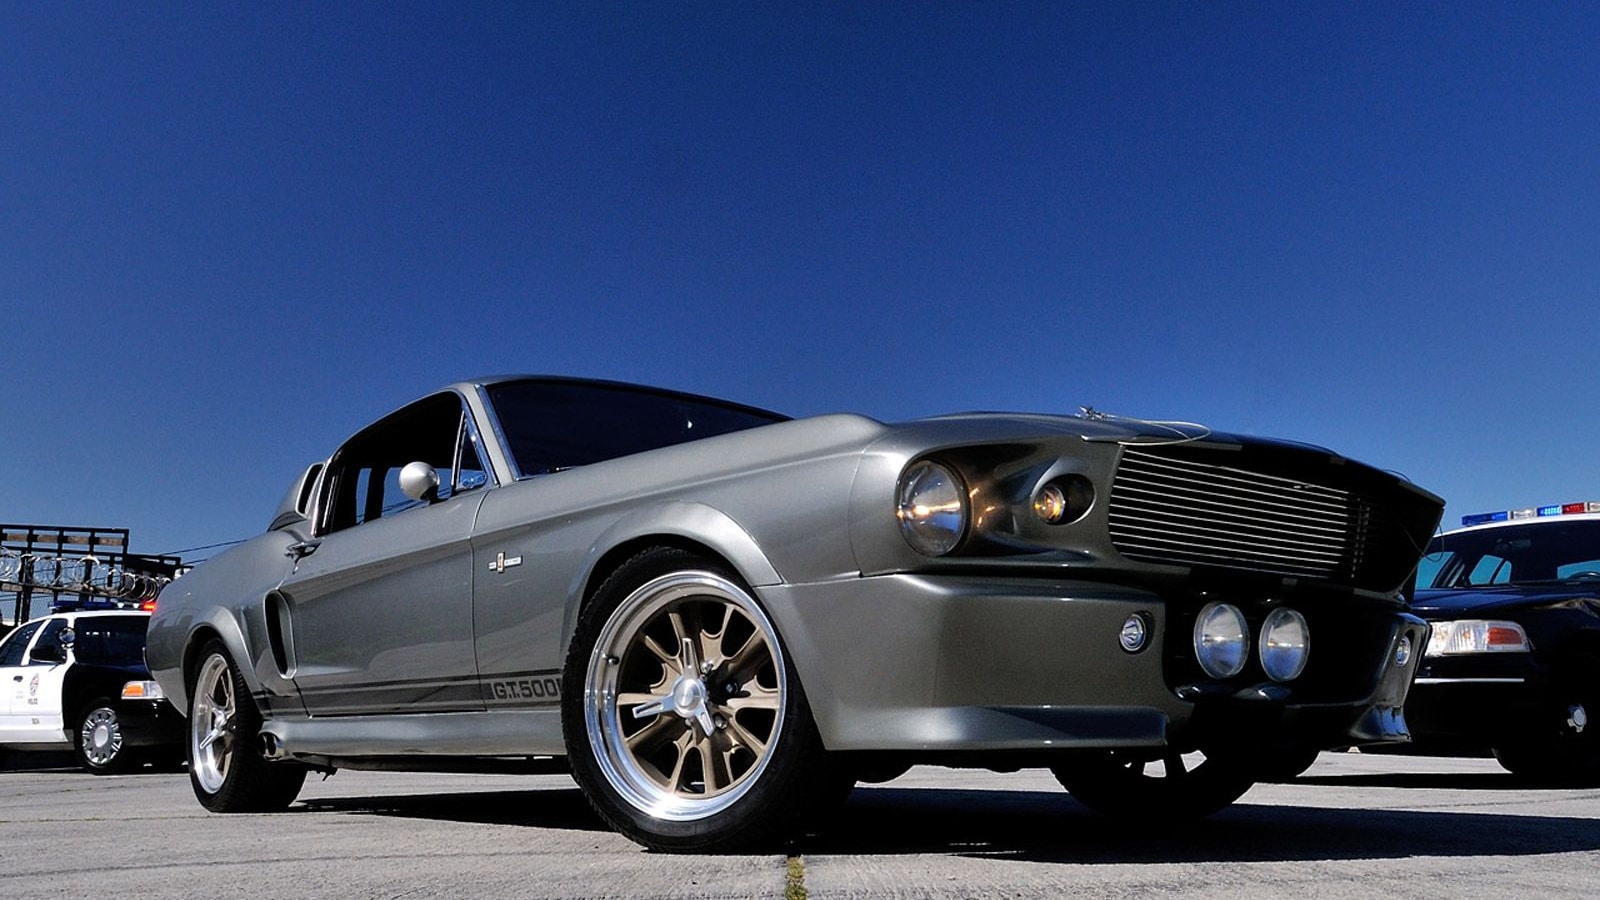 1967 Ford Mustang ‘Eleanor’ from Gone In 60 Seconds